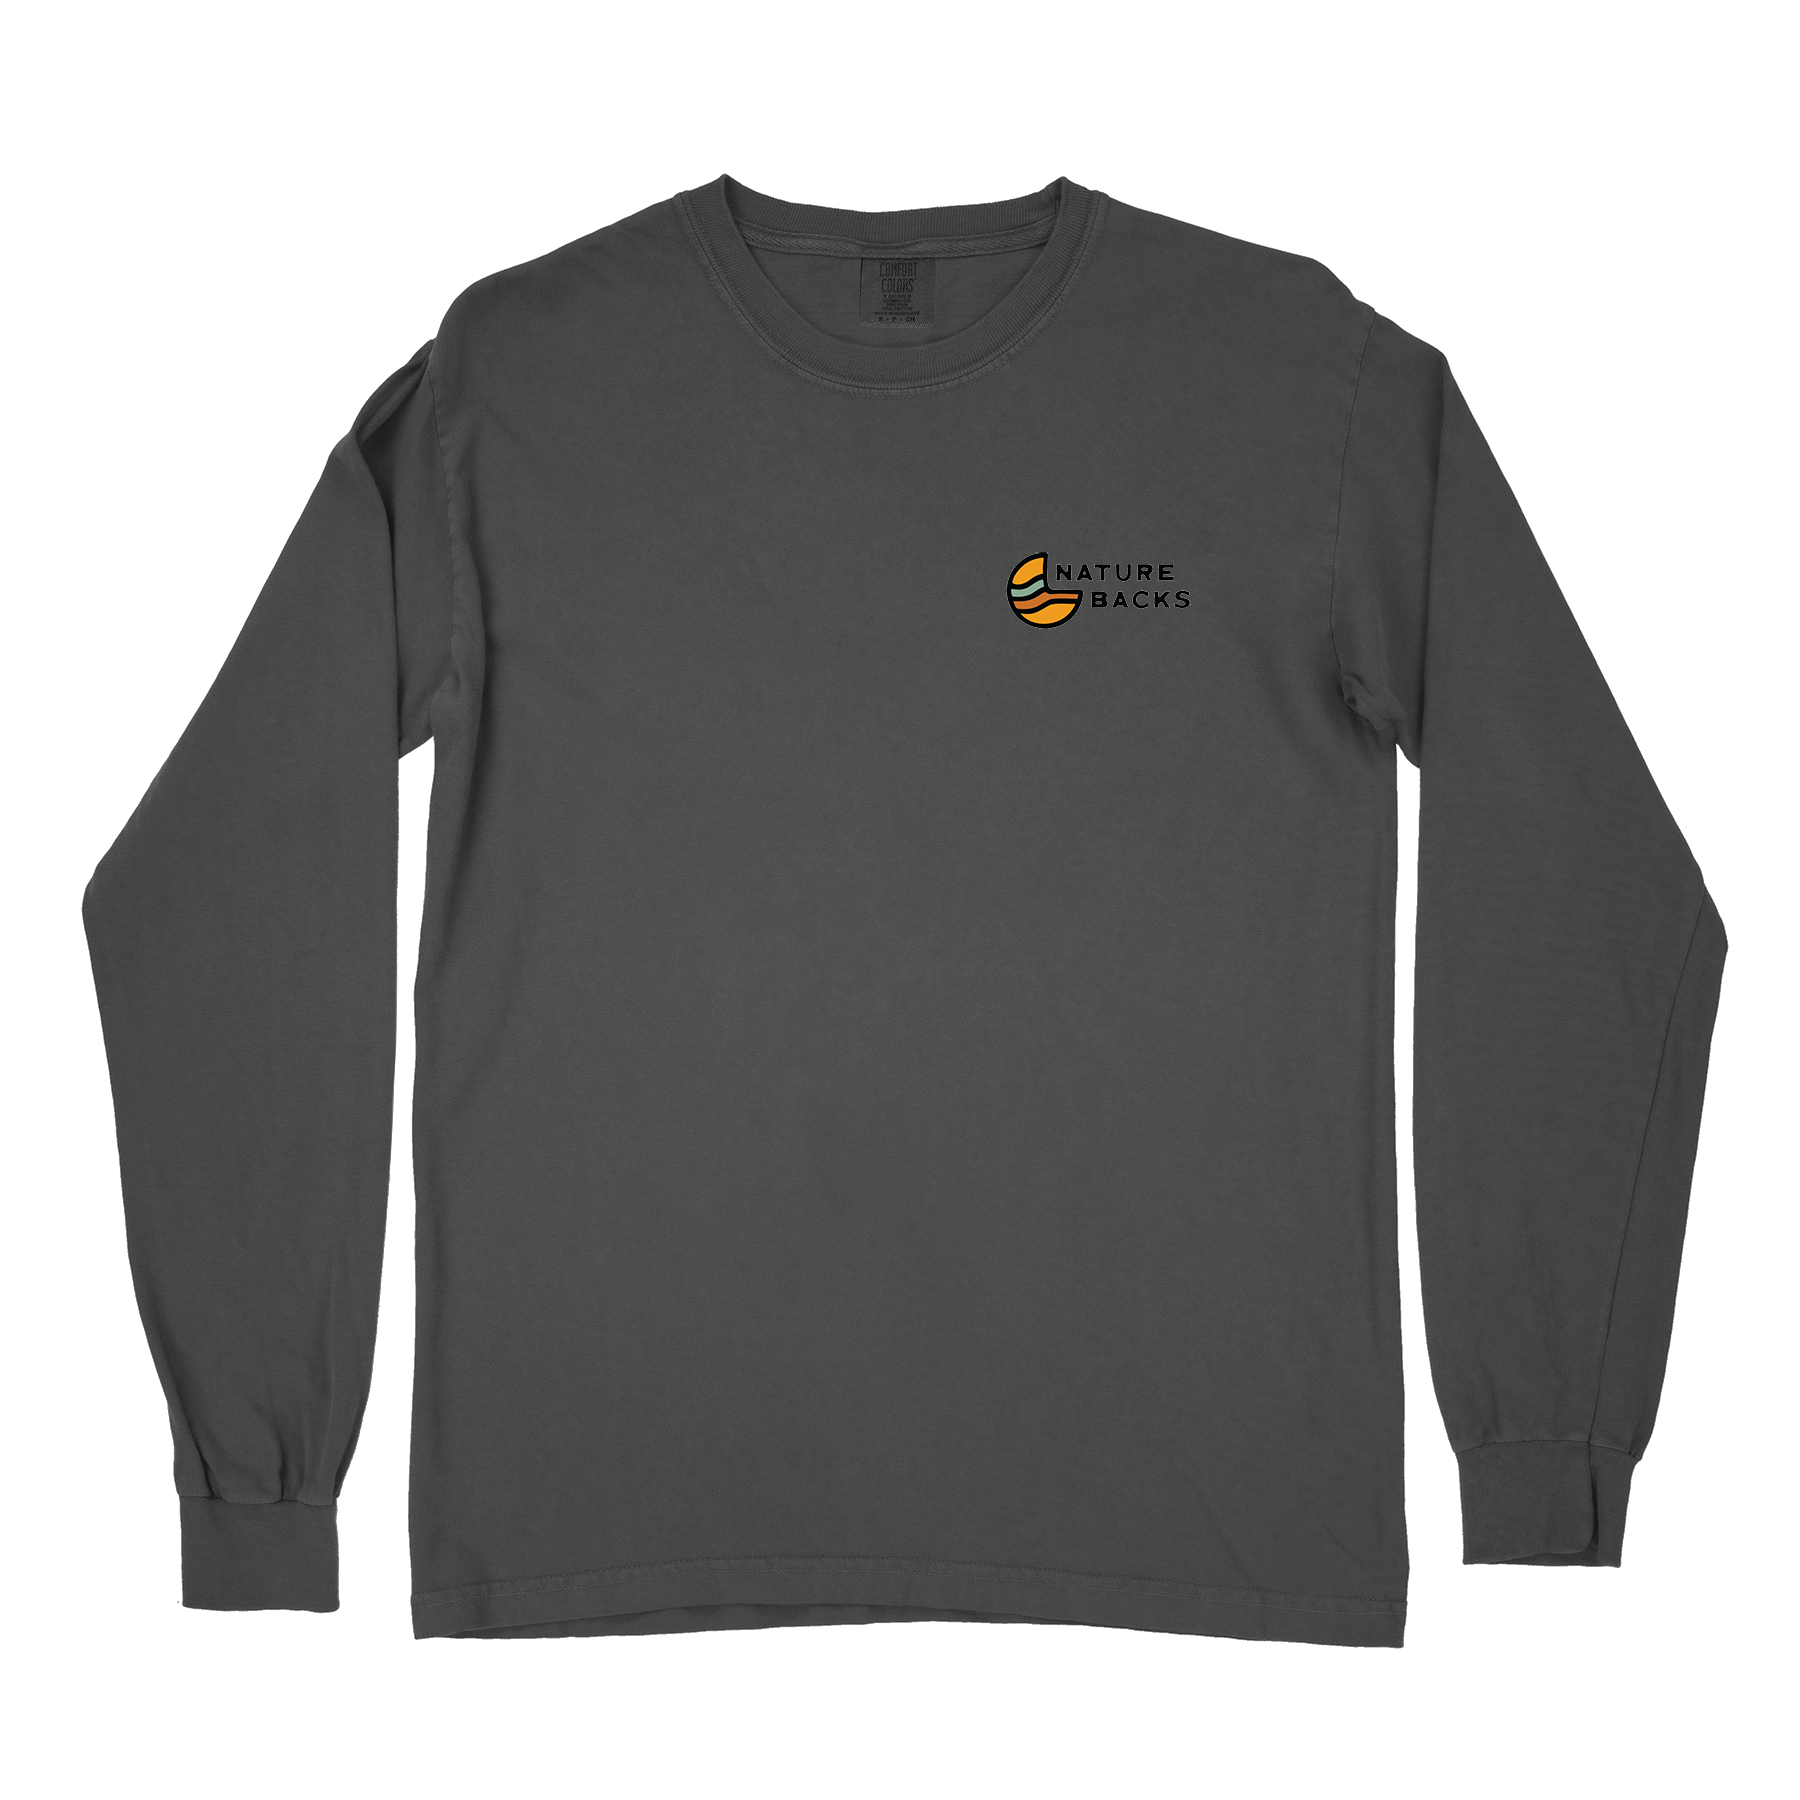 Nature Backs Comfort Colors Emerge Charcoal Long Sleeve T-Shirt | Nature-Inspired Design on Ultra-Soft Fabric